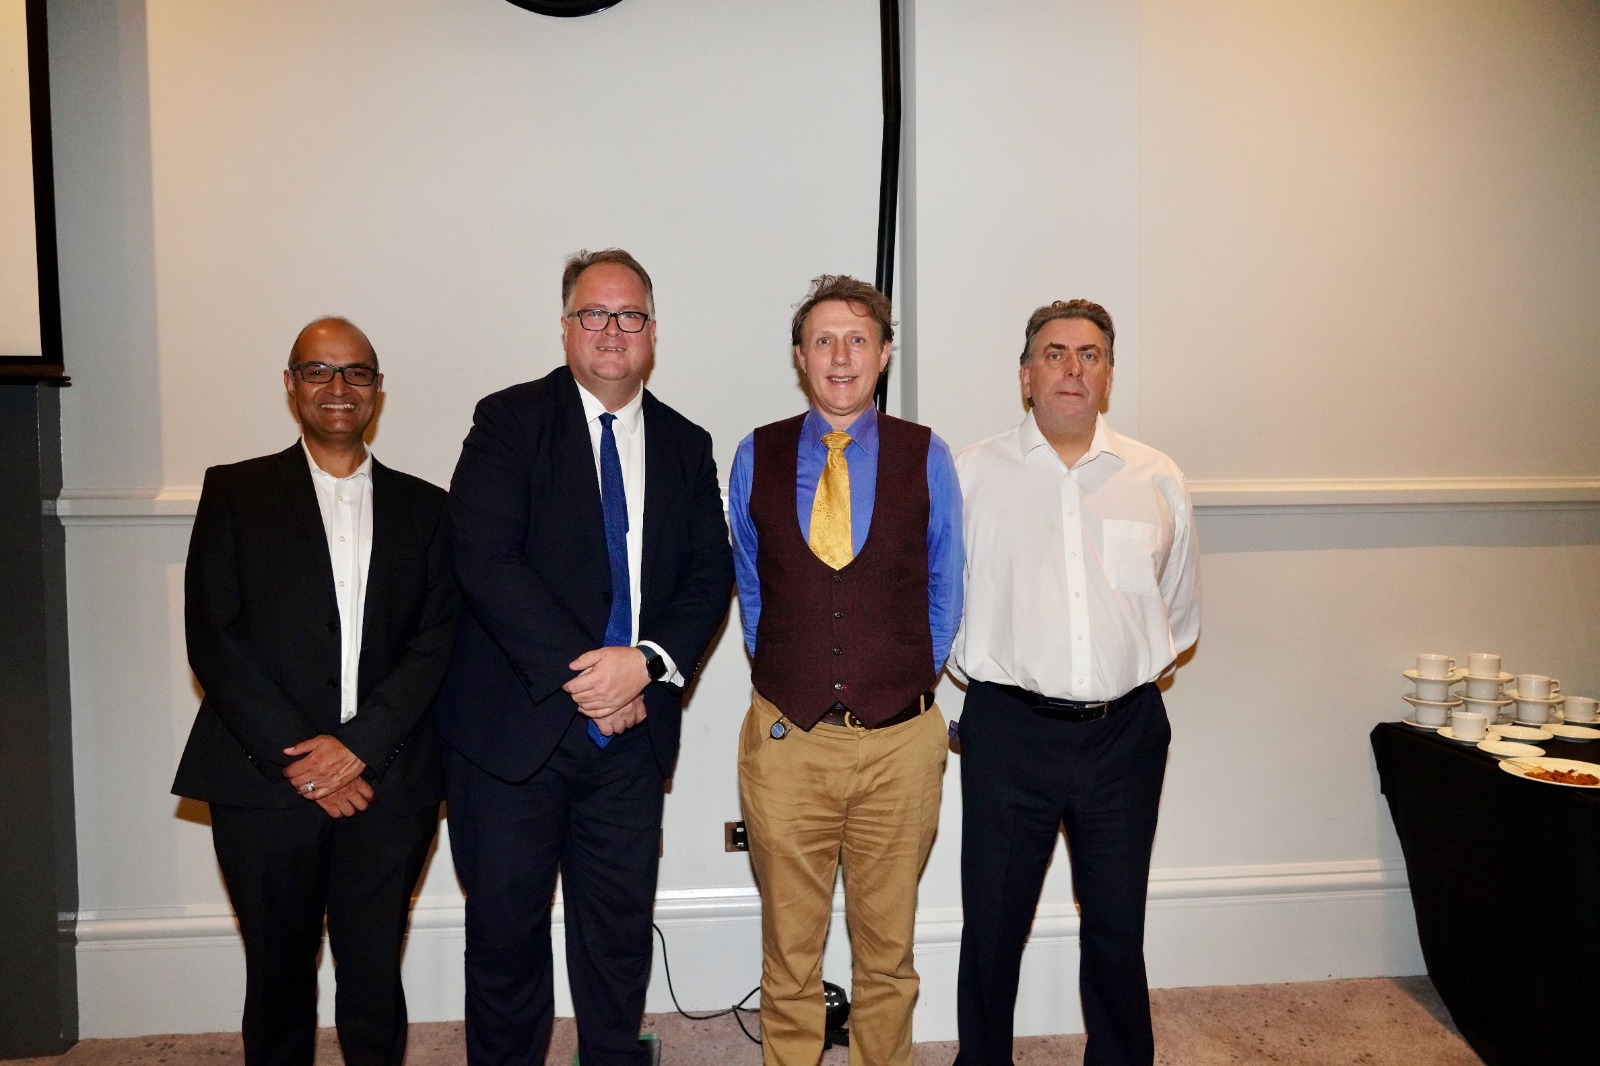 Dr David Wrigley, BMA GPCE Chair with the LMC officers